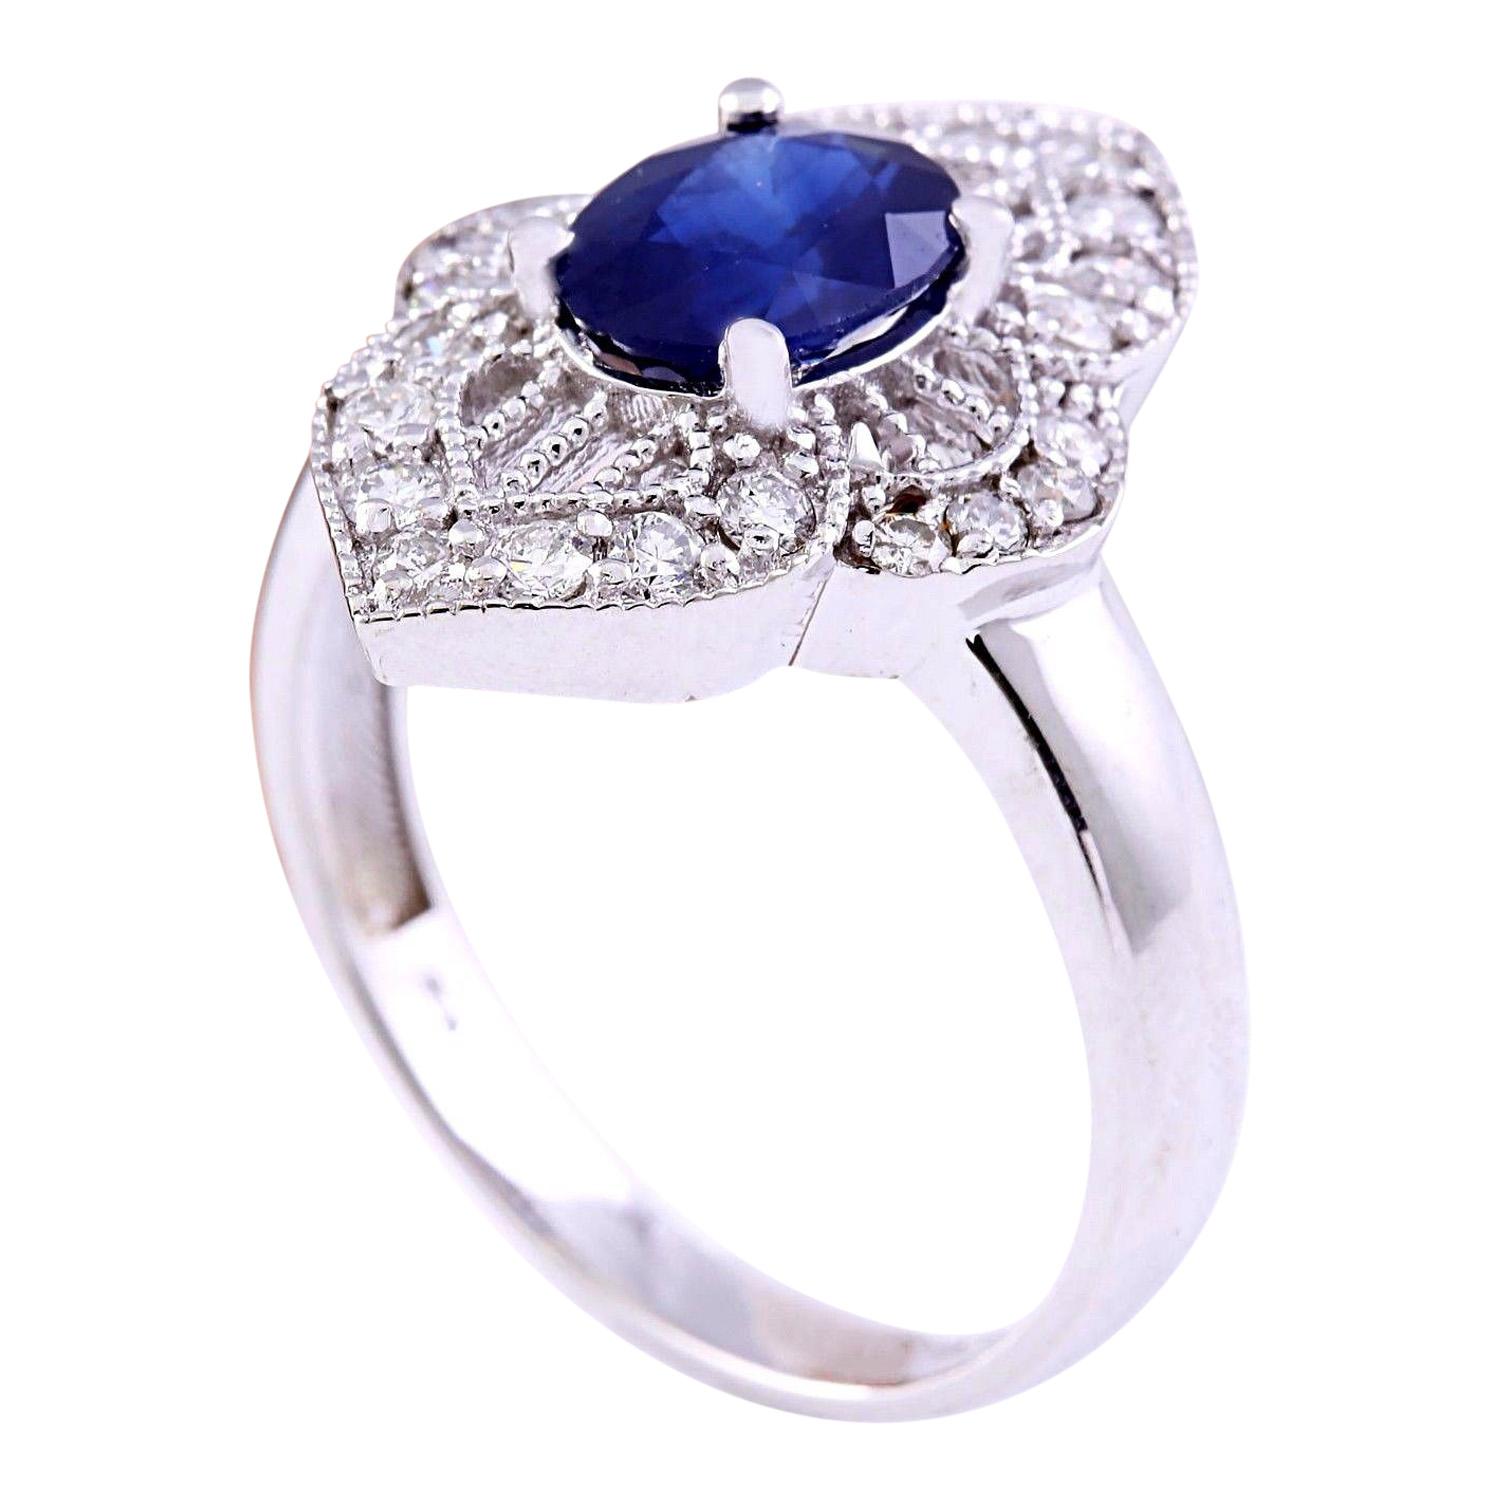 Oval Cut Exquisite Natural Sapphire Diamond Ring In 14 Karat Solid White Gold  For Sale